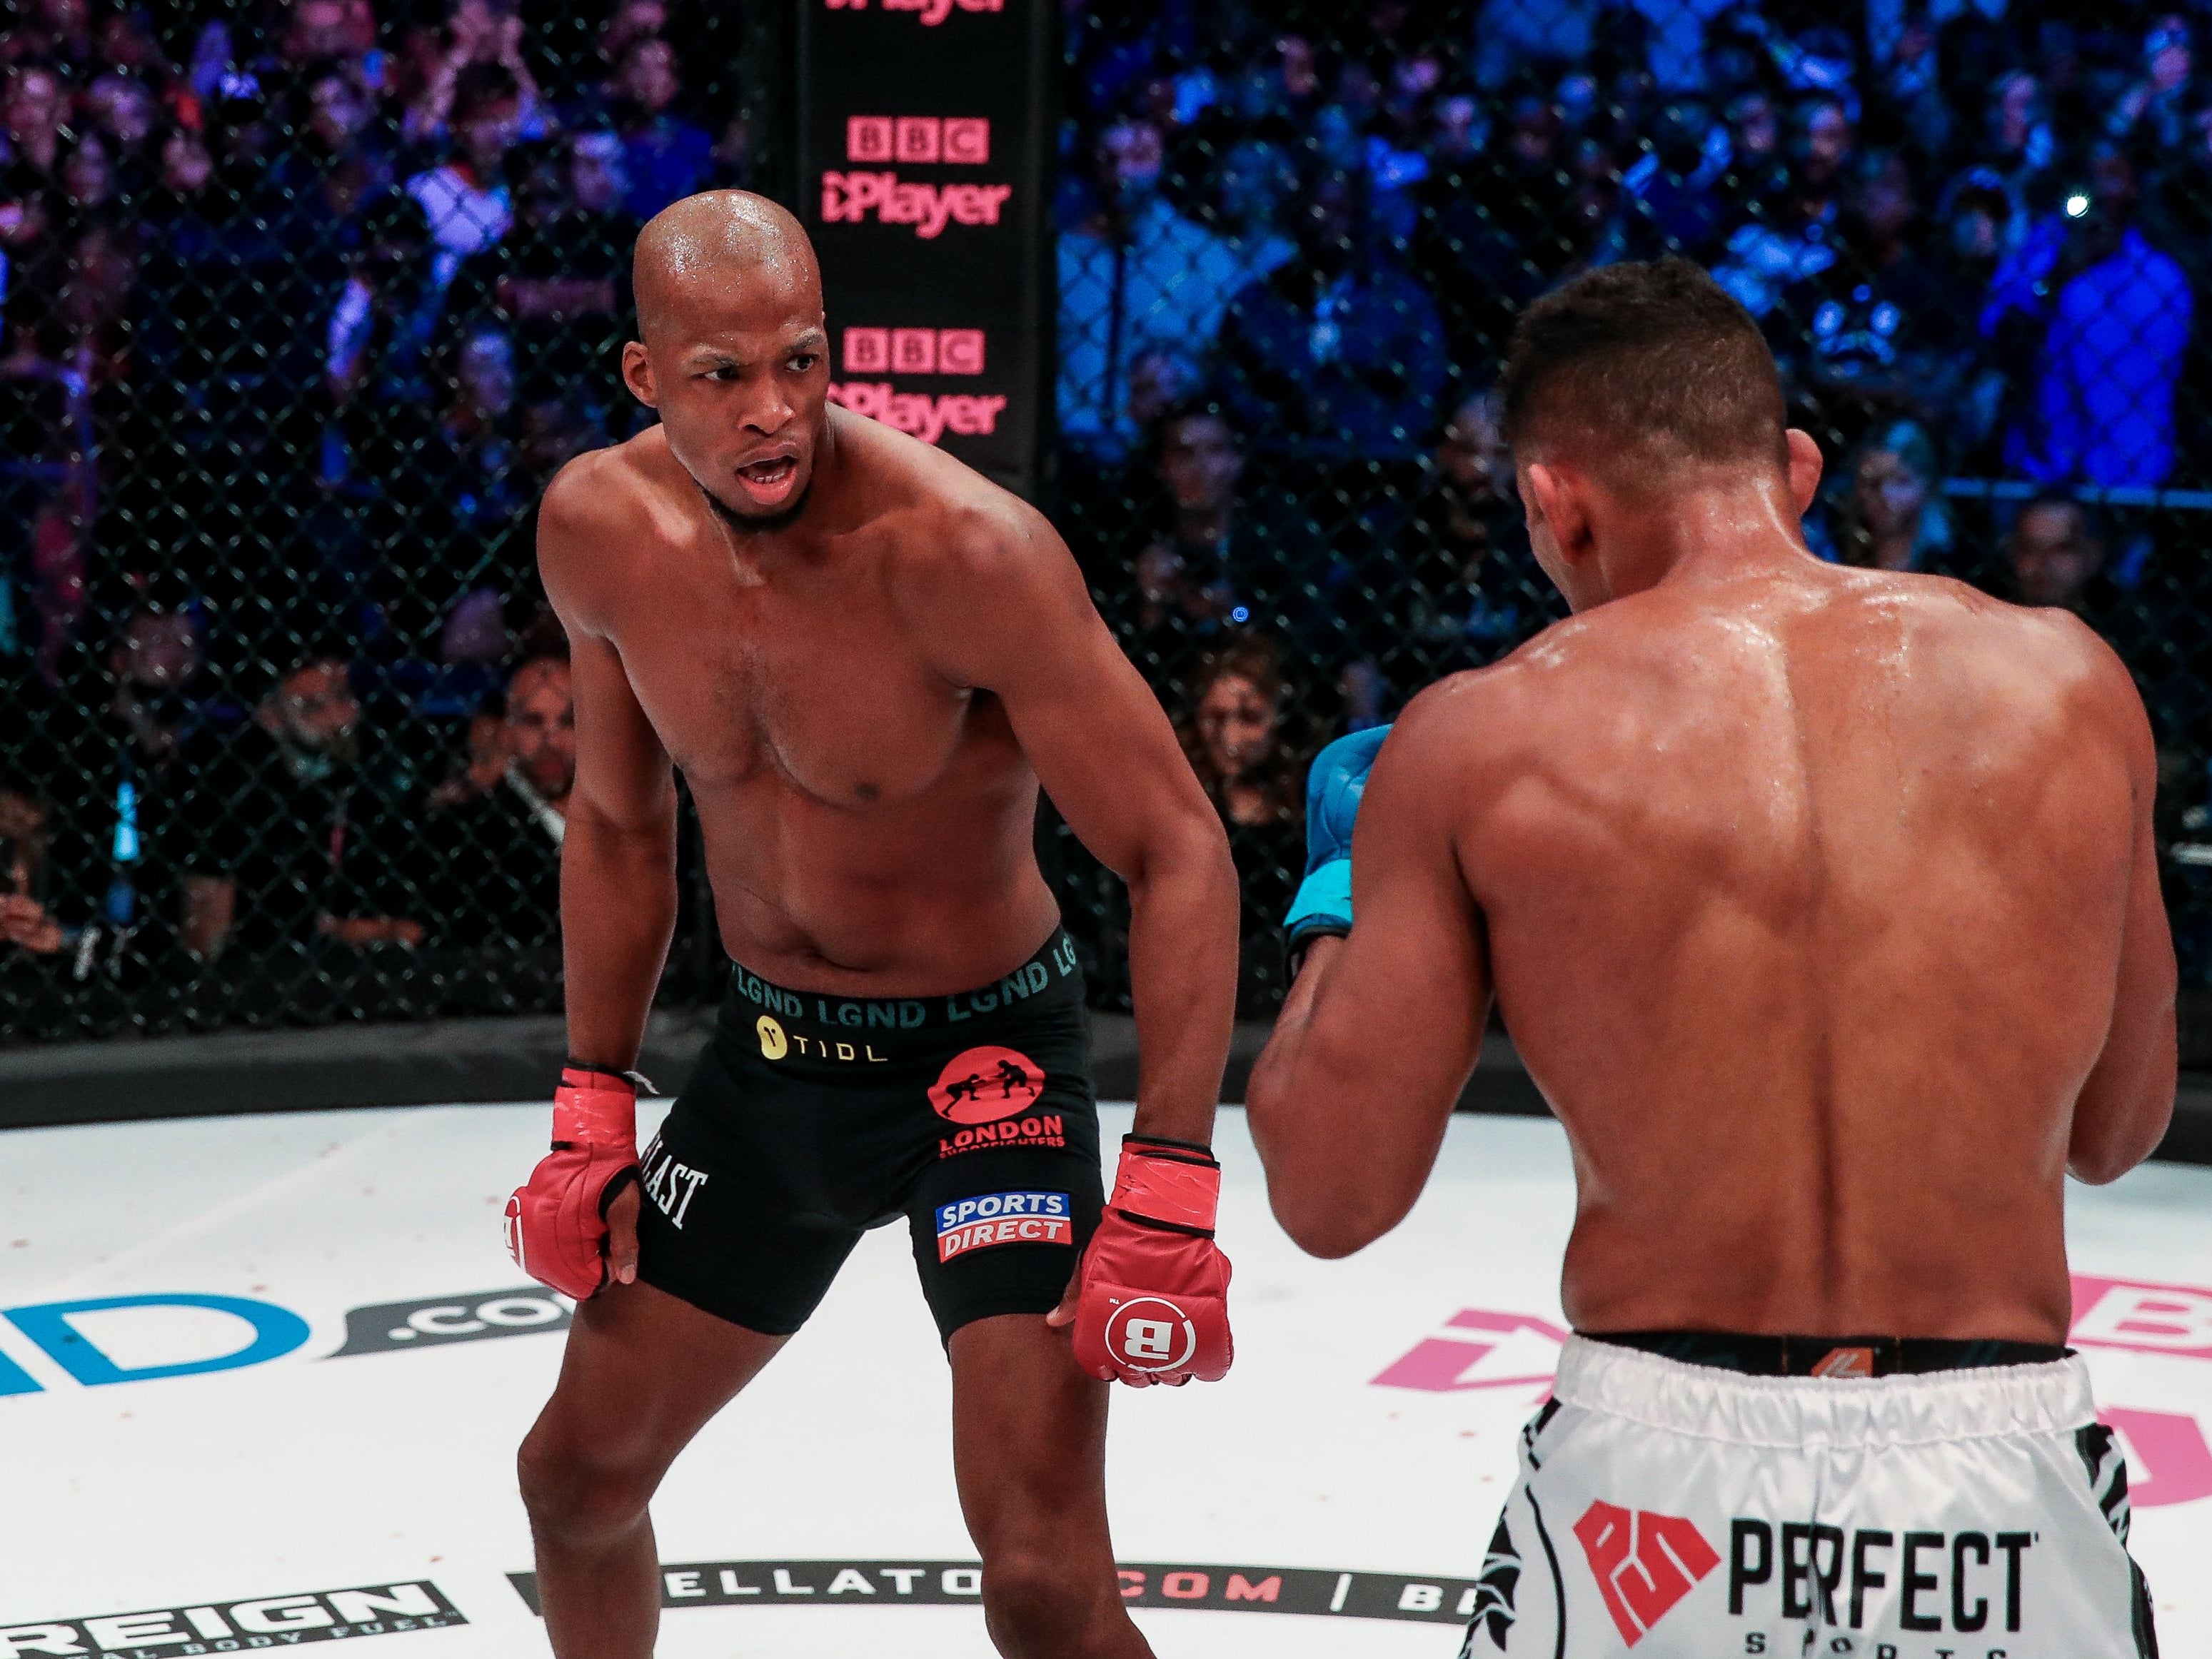 British welterweight Michael Page (left) in action at a Bellator event